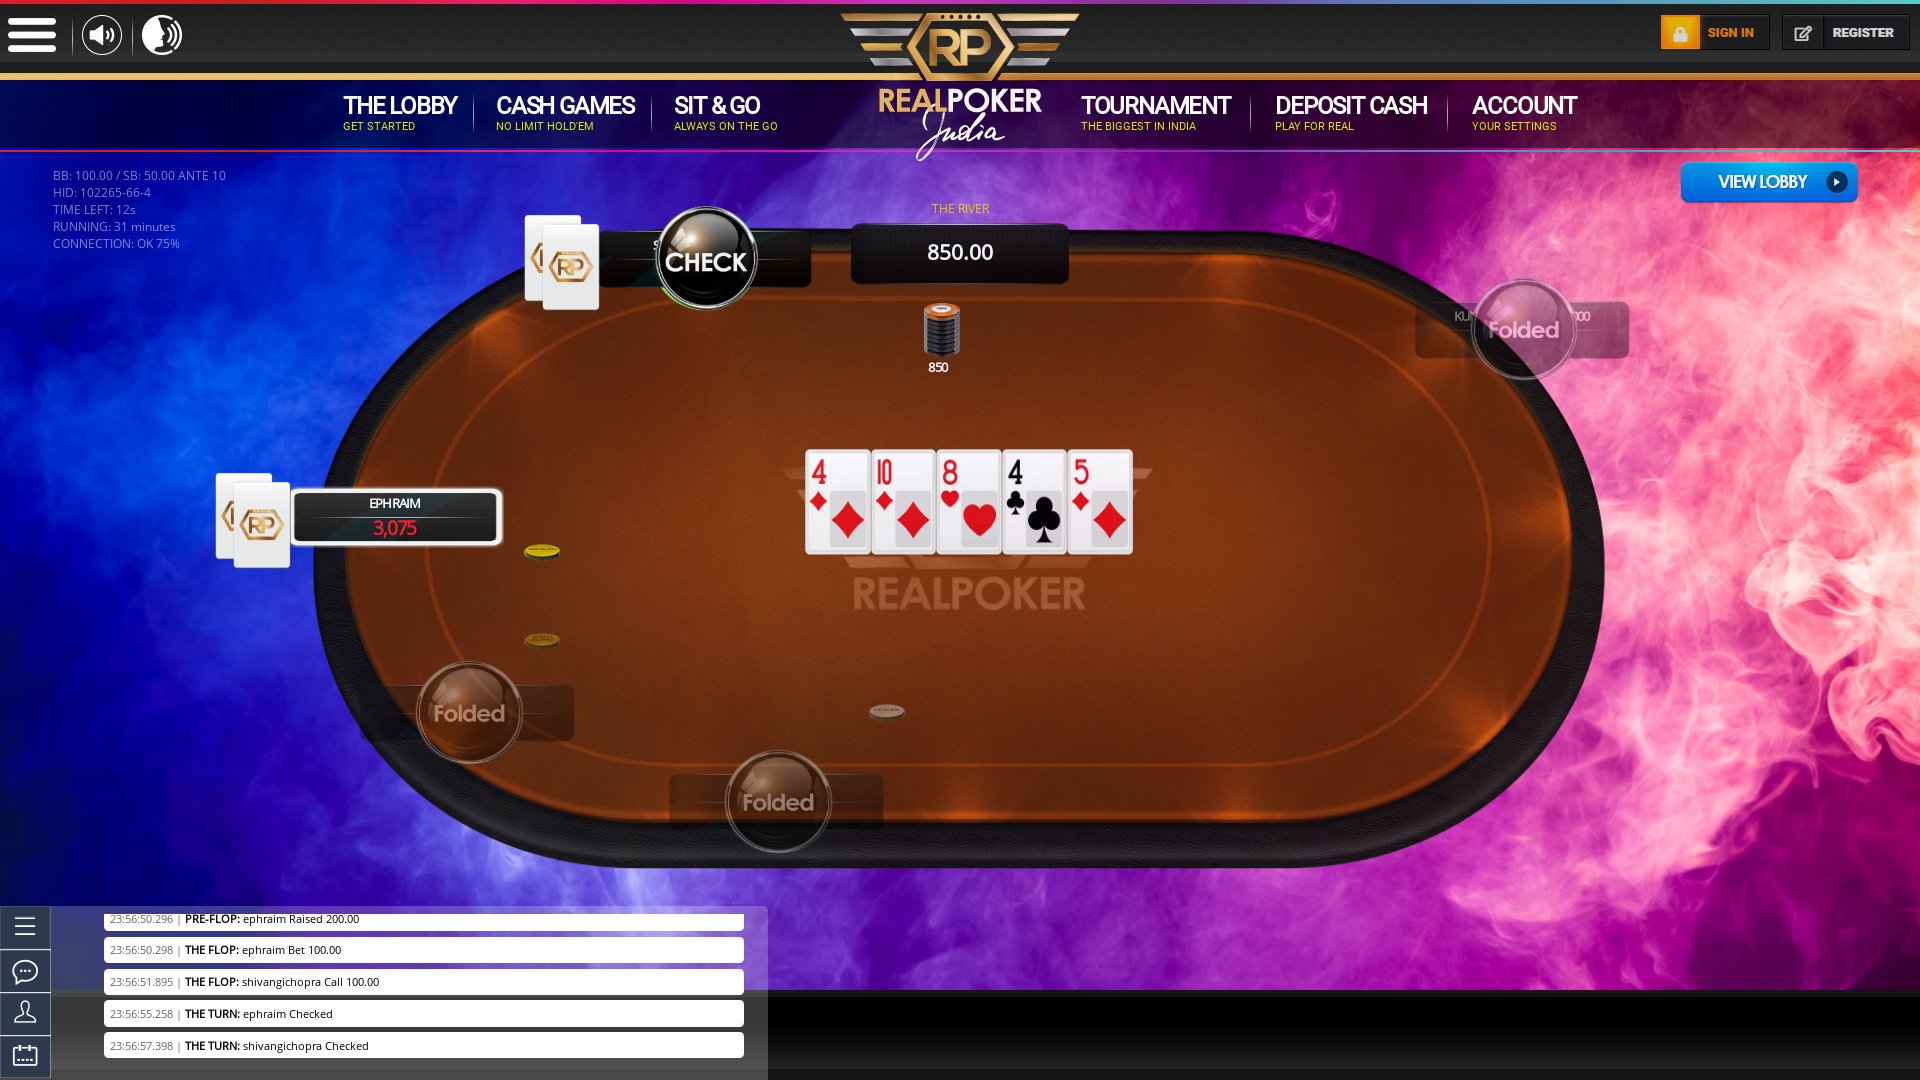 10 player poker in the 31st minute